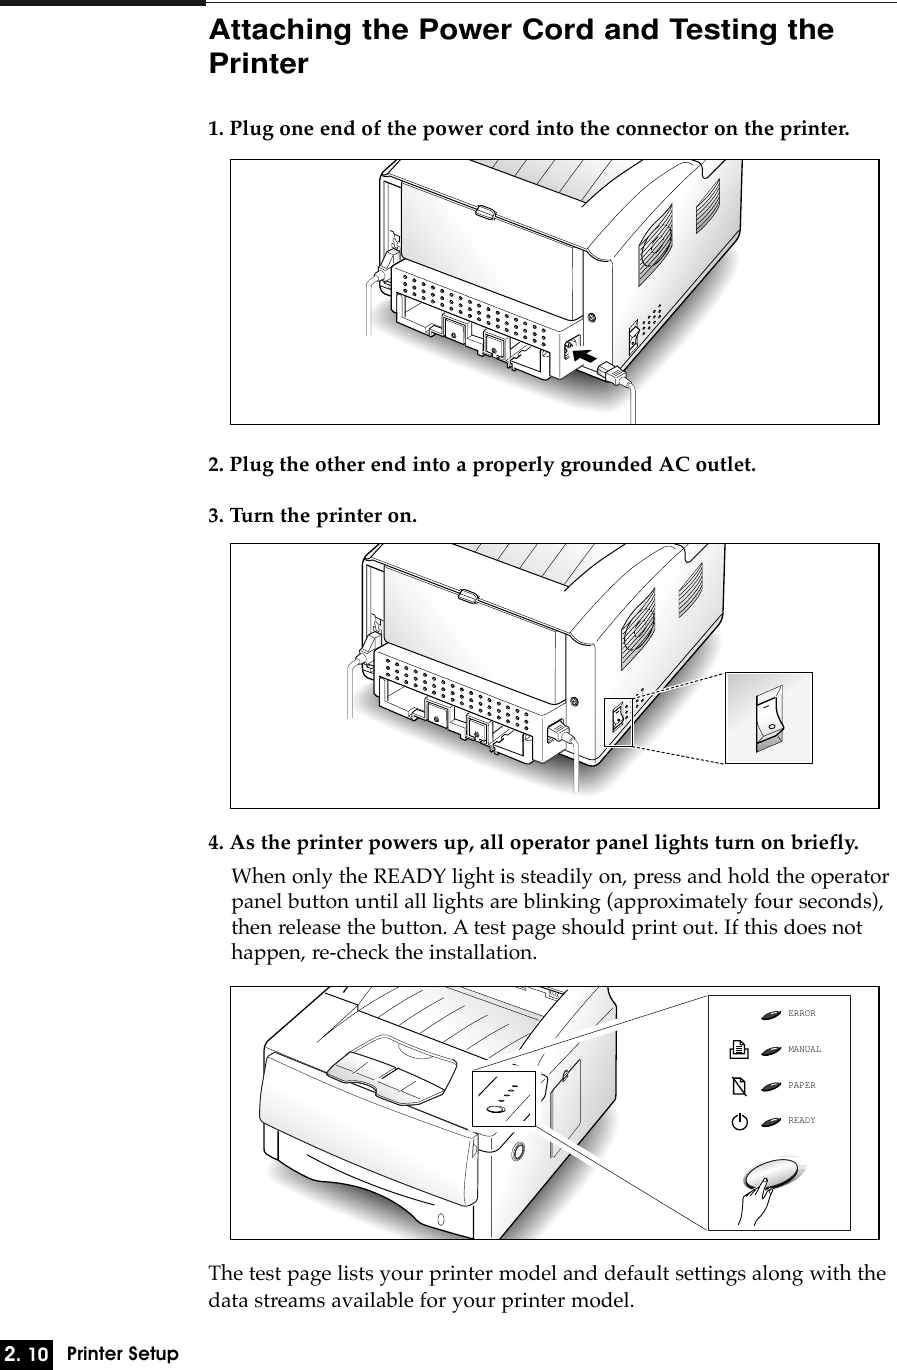 2. 10Printer SetupAttaching the Power Cord and Testing thePrinter1. Plug one end of the power cord into the connector on the printer.2. Plug the other end into a properly grounded AC outlet.3. Turn the printer on.4. As the printer powers up, all operator panel lights turn on briefly.When only the READY light is steadily on, press and hold the operatorpanel button until all lights are blinking (approximately four seconds),then release the button. A test page should print out. If this does nothappen, re-check the installation.The test page lists your printer model and default settings along with thedata streams available for your printer model.ERRORMANUALPAPERREADY